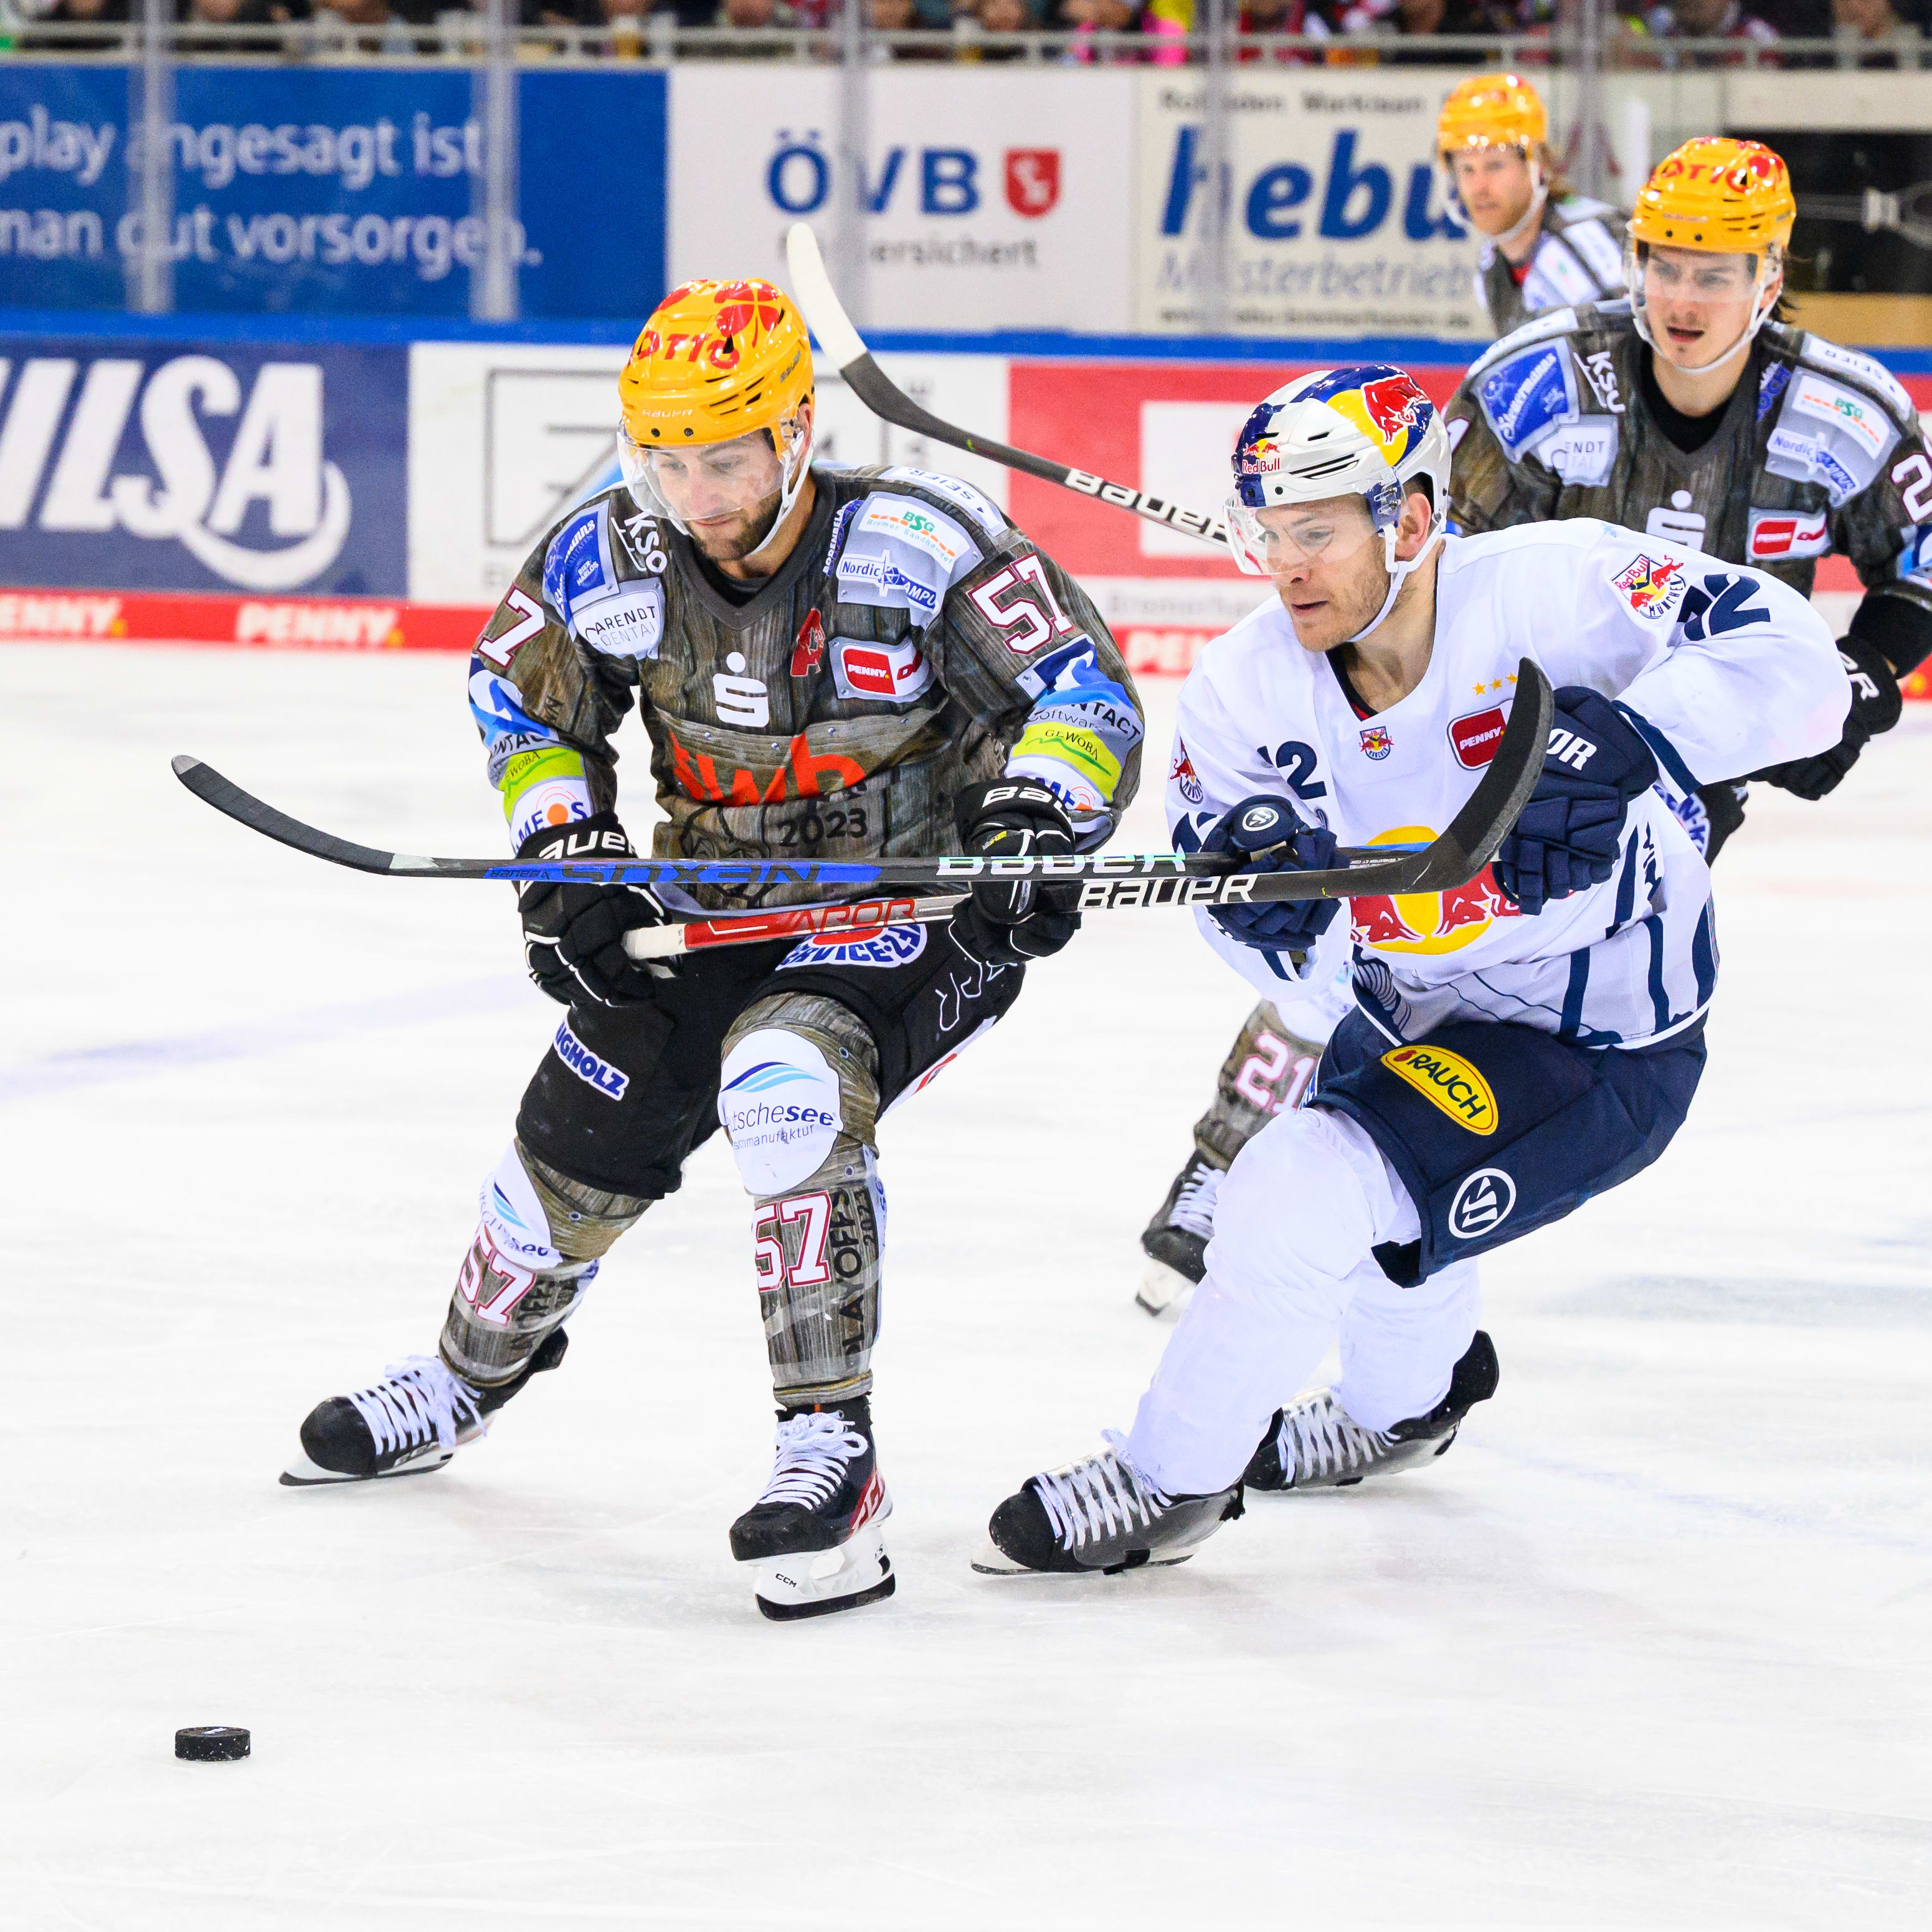 Defeat in Bremerhaven: Game 2 also goes to the Pinguins